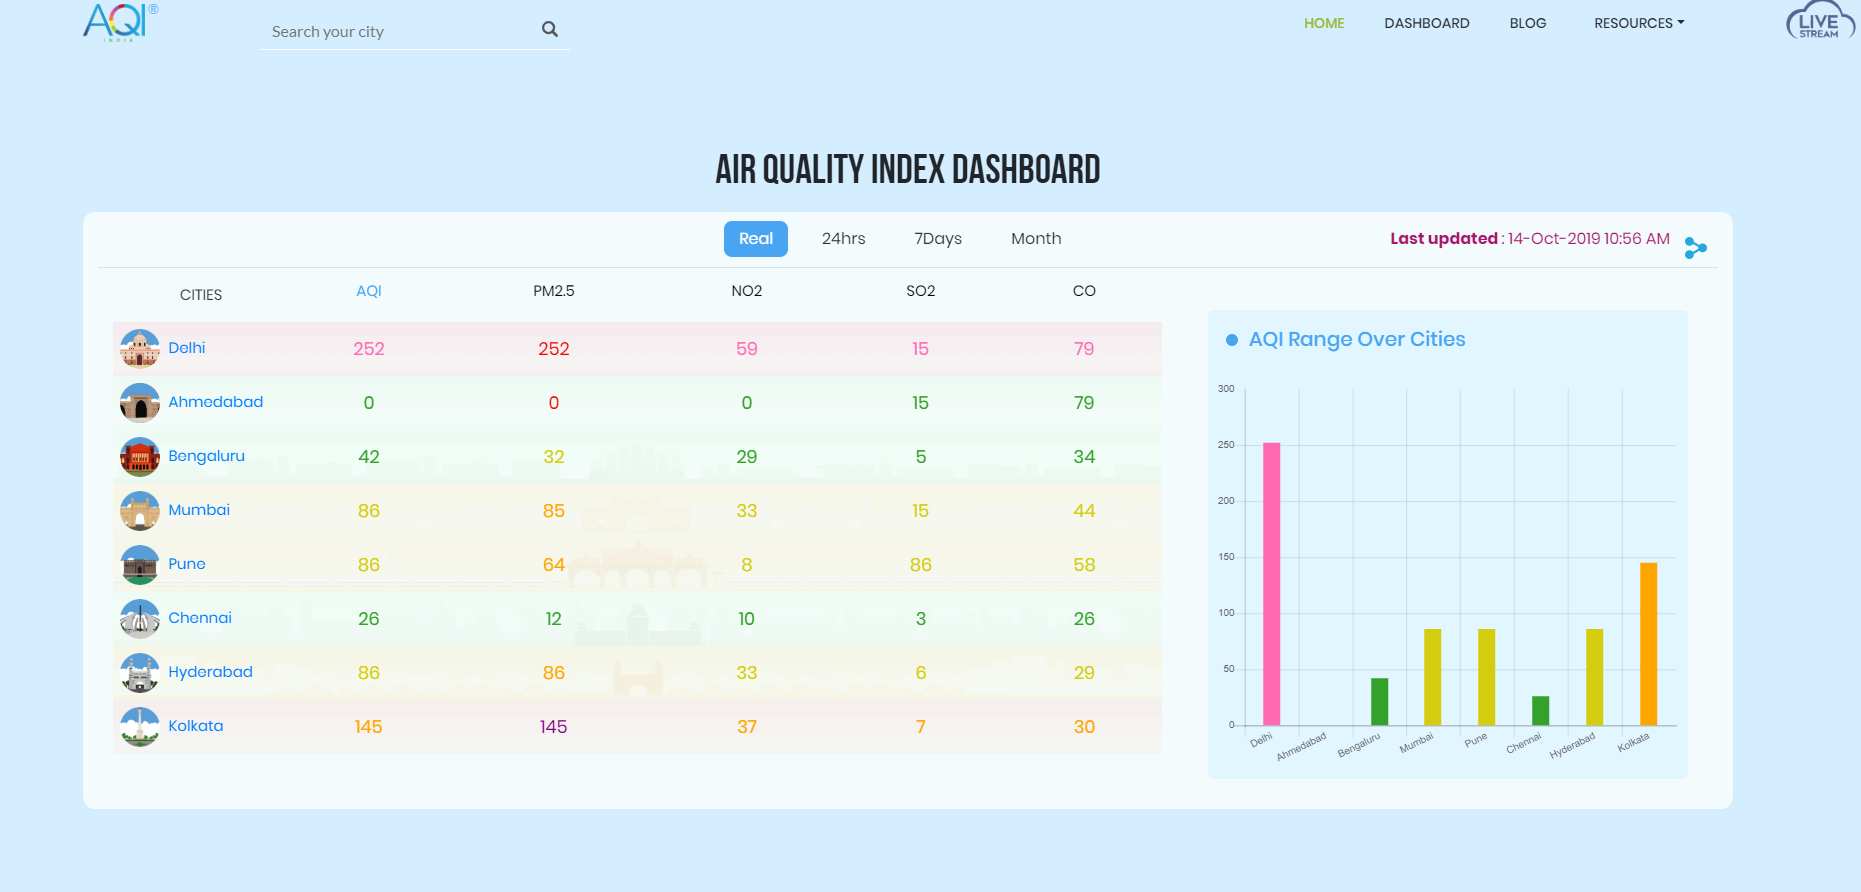 The AQI in Indian cities. image credit: AQI